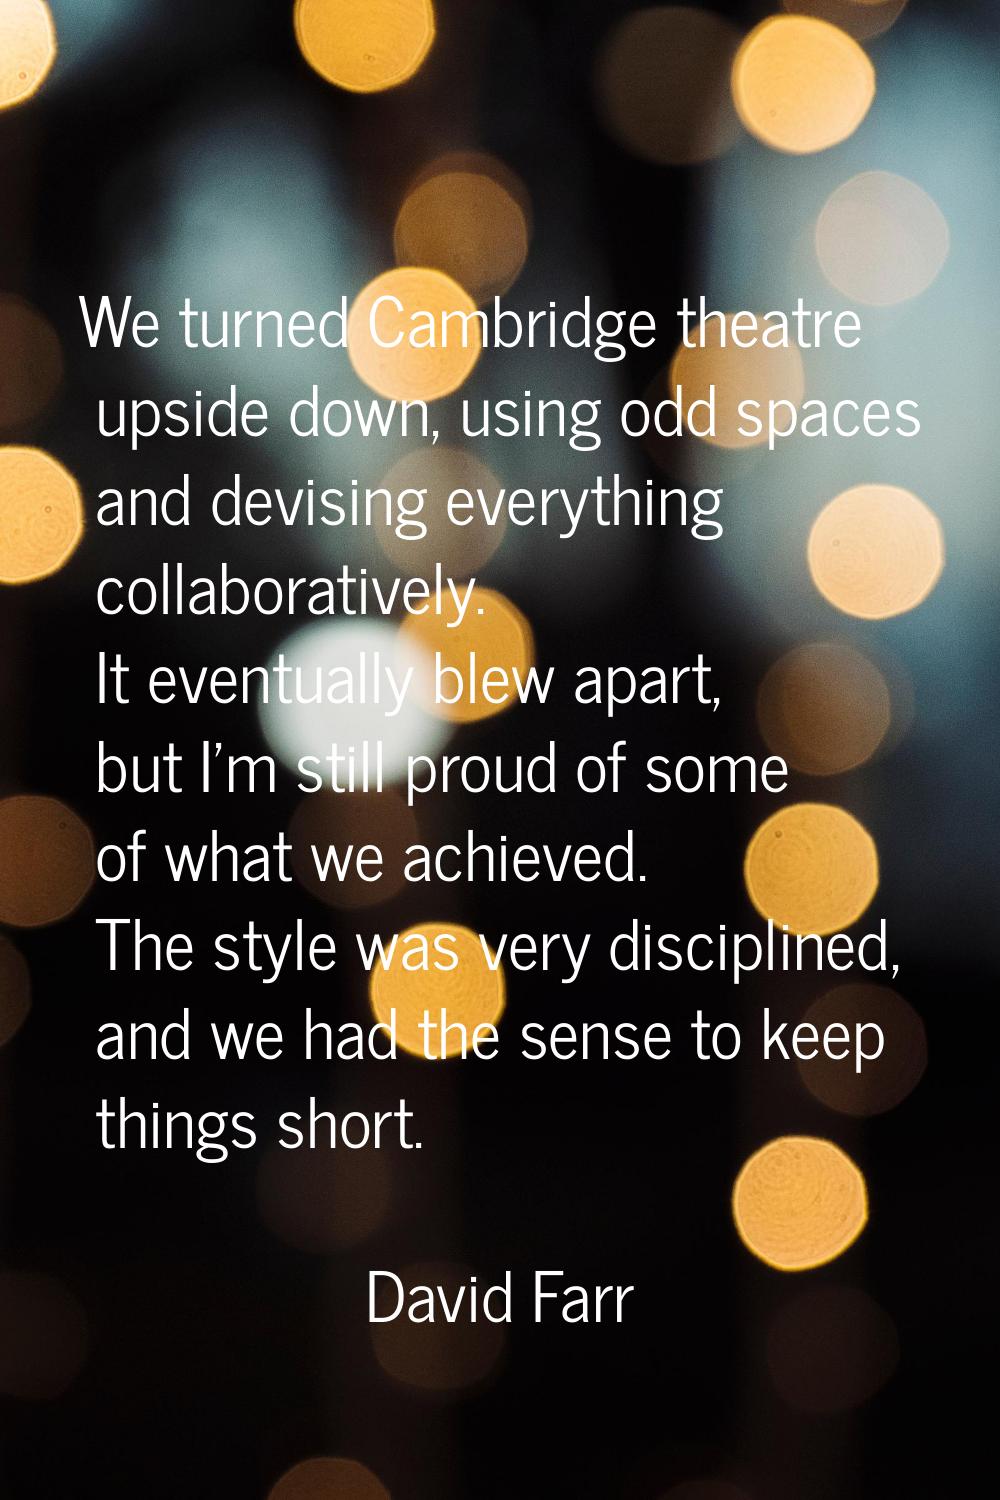 We turned Cambridge theatre upside down, using odd spaces and devising everything collaboratively. 